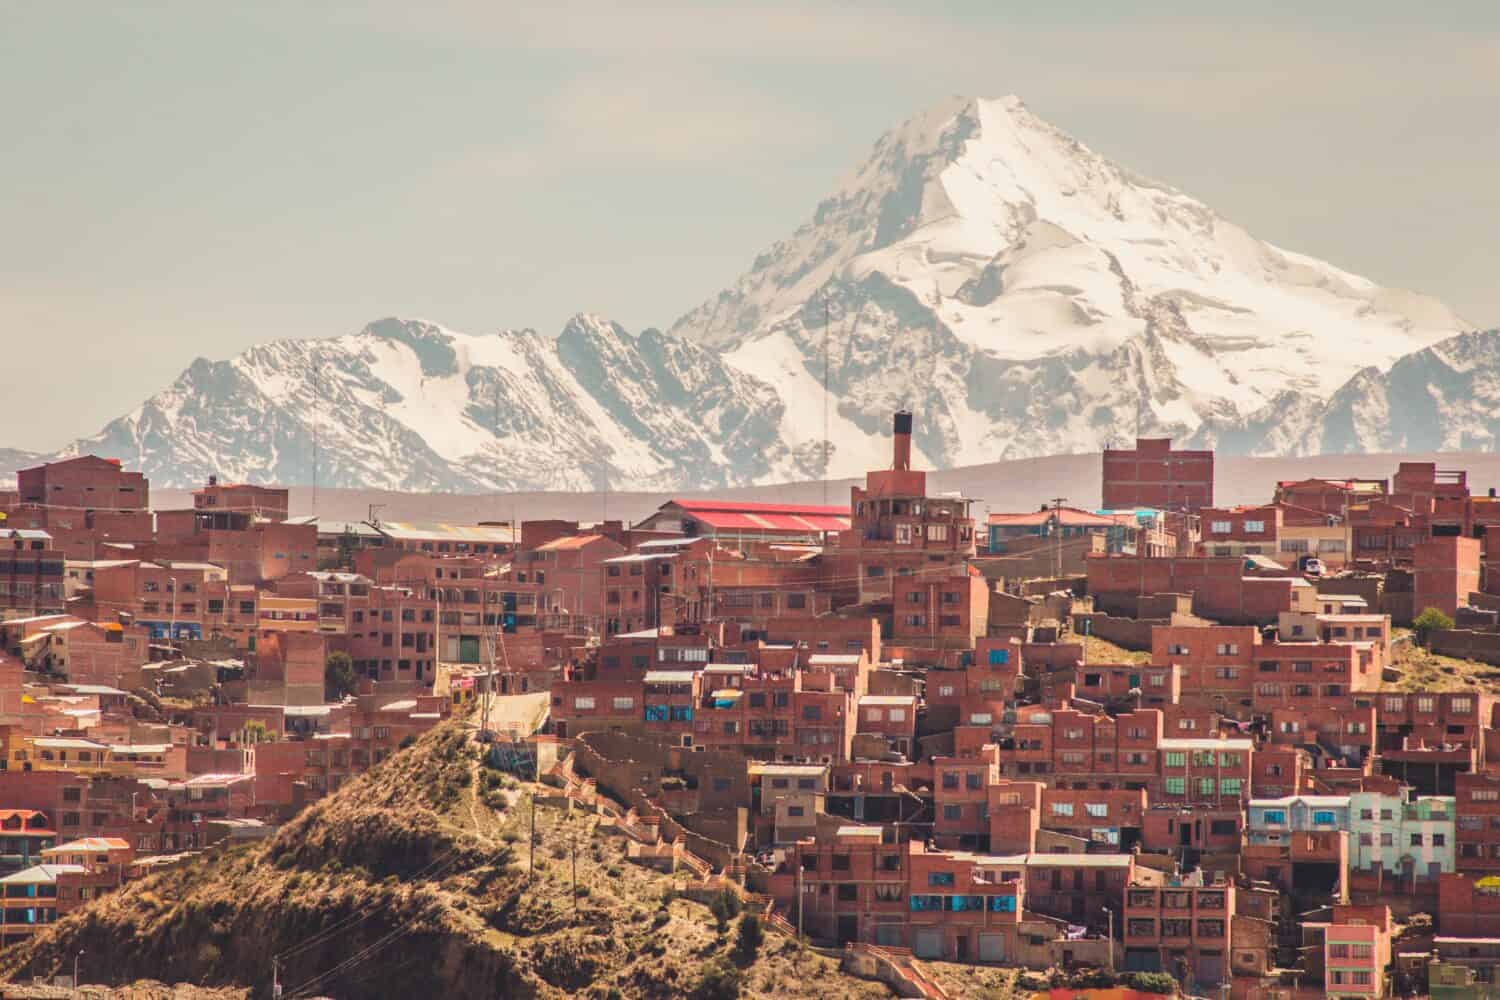 <p>There are so many things to do in Bolivia and so many sites to see —  Lake Titicaca, the Salt Flats of Salar de Uyuni, and other gorgeous places. The best part is it’s extremely affordable. You can cap your budget at $40 per day and still enjoy the country to the max.</p><p>The post <a href="https://a-z-animals.com/blog/top-cheapest-countries-to-travel-to-and-visit/?utm_campaign=msn&utm_source=msn_slideshow&utm_content=1251002">The Top 15 Cheapest Countries to Travel To and Visit</a> appeared first on <a href="https://a-z-animals.com?utm_campaign=msn&utm_source=msn_slideshow&utm_content=1251002">A-Z Animals</a>.</p><p><strong>Up Next</strong></p><ul> <li><a href="https://a-z-animals.com/blog/crocodile-makes-a-rookie-mistake-and-chomps-down-on-an-electric-eel-charged-with-600-volts/?utm_campaign=msn&utm_source=msn_slideshow&utm_content=1251002&utm_medium=more_from">Crocodile Makes a Rookie Mistake and Chomps Down on an Electric Eel Charged with 600 Volts</a></li> <li><a href="https://a-z-animals.com/articles/natural-raccoon-predators-what-eats-raccoons/?utm_campaign=msn&utm_source=msn_slideshow&utm_content=1251002&utm_medium=more_from">10 Natural Raccoon Predators: What Eats Raccoons?</a></li> </ul>